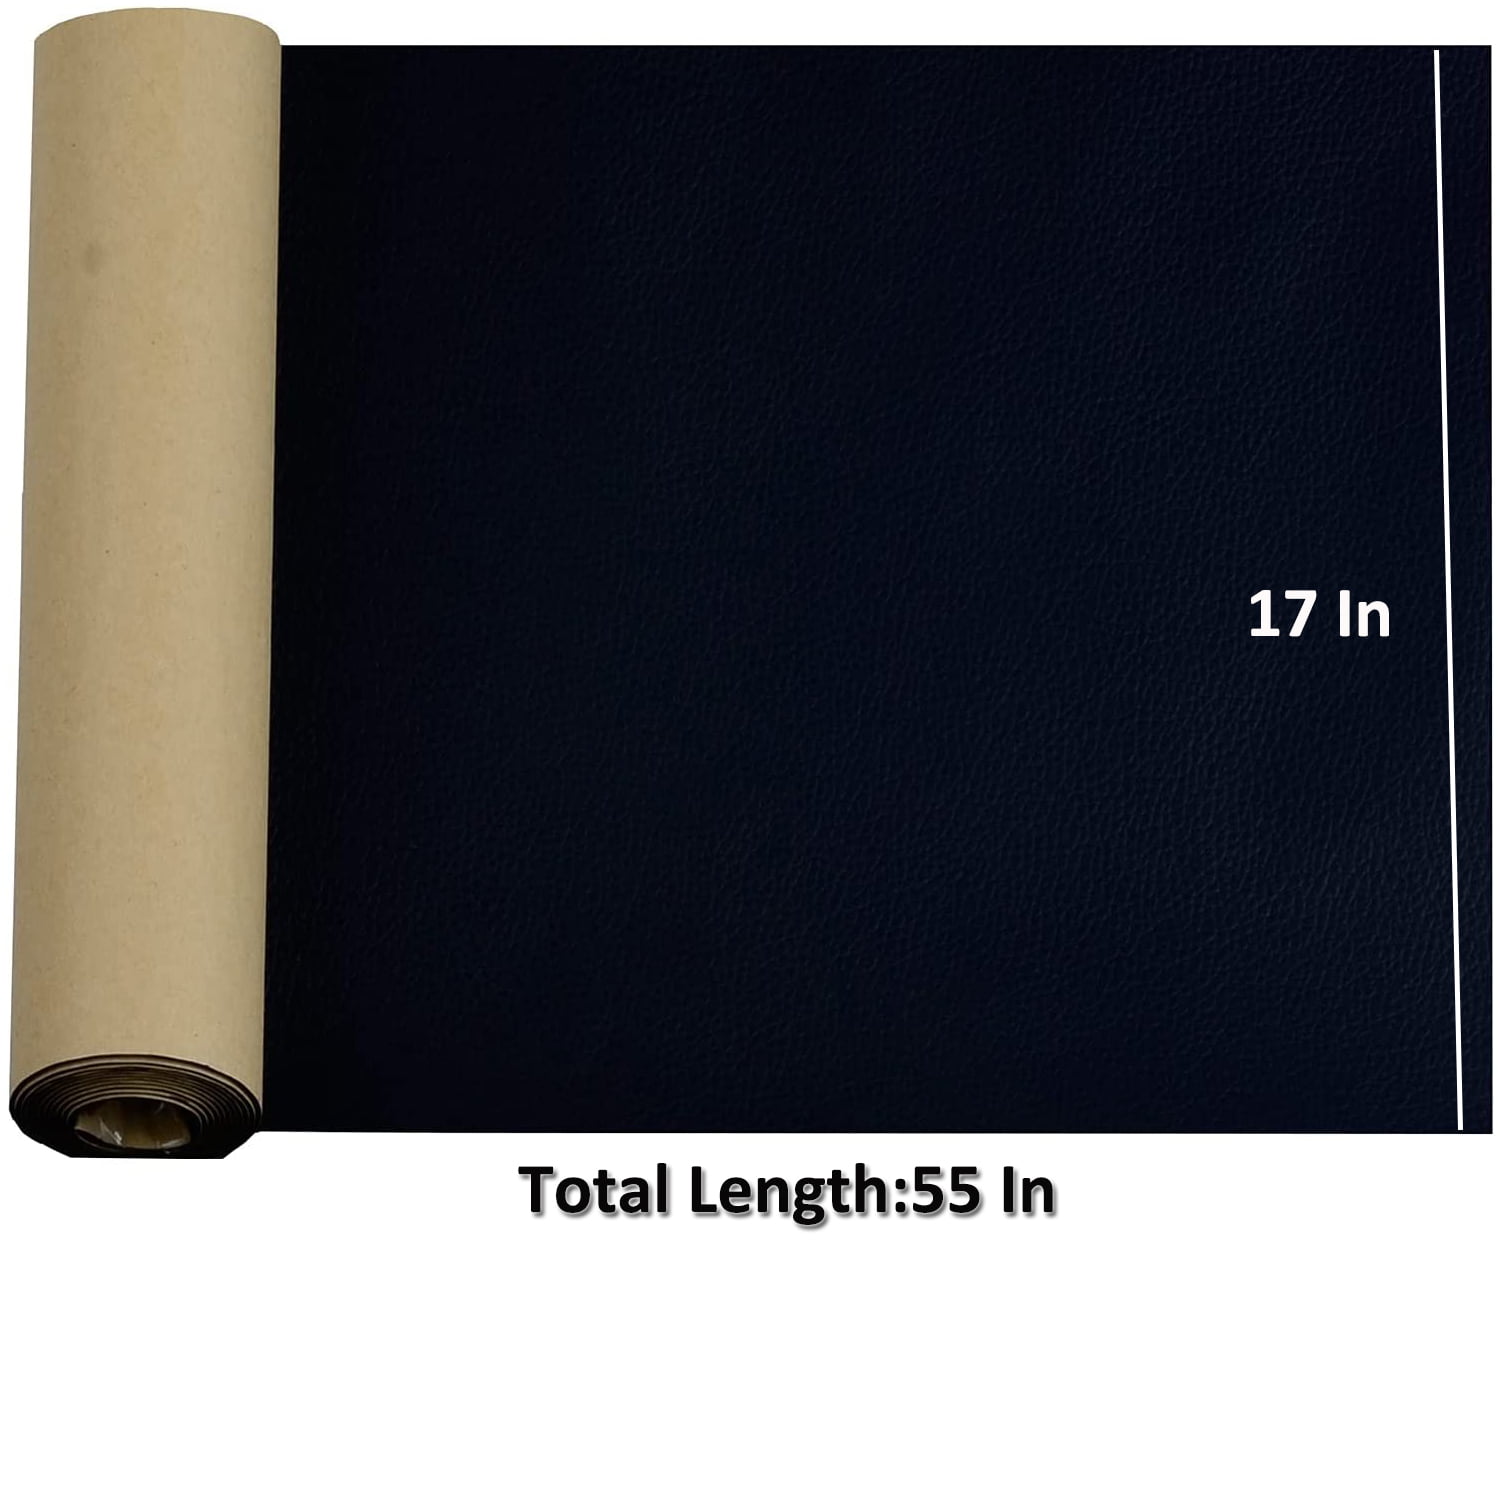 KJML DIY Leather Repair Patch for Couches 17X55inch Large Self-Adhesive  refinisher cuttable reupholster Tape Patches kit for Couch Car Seats  Furniture